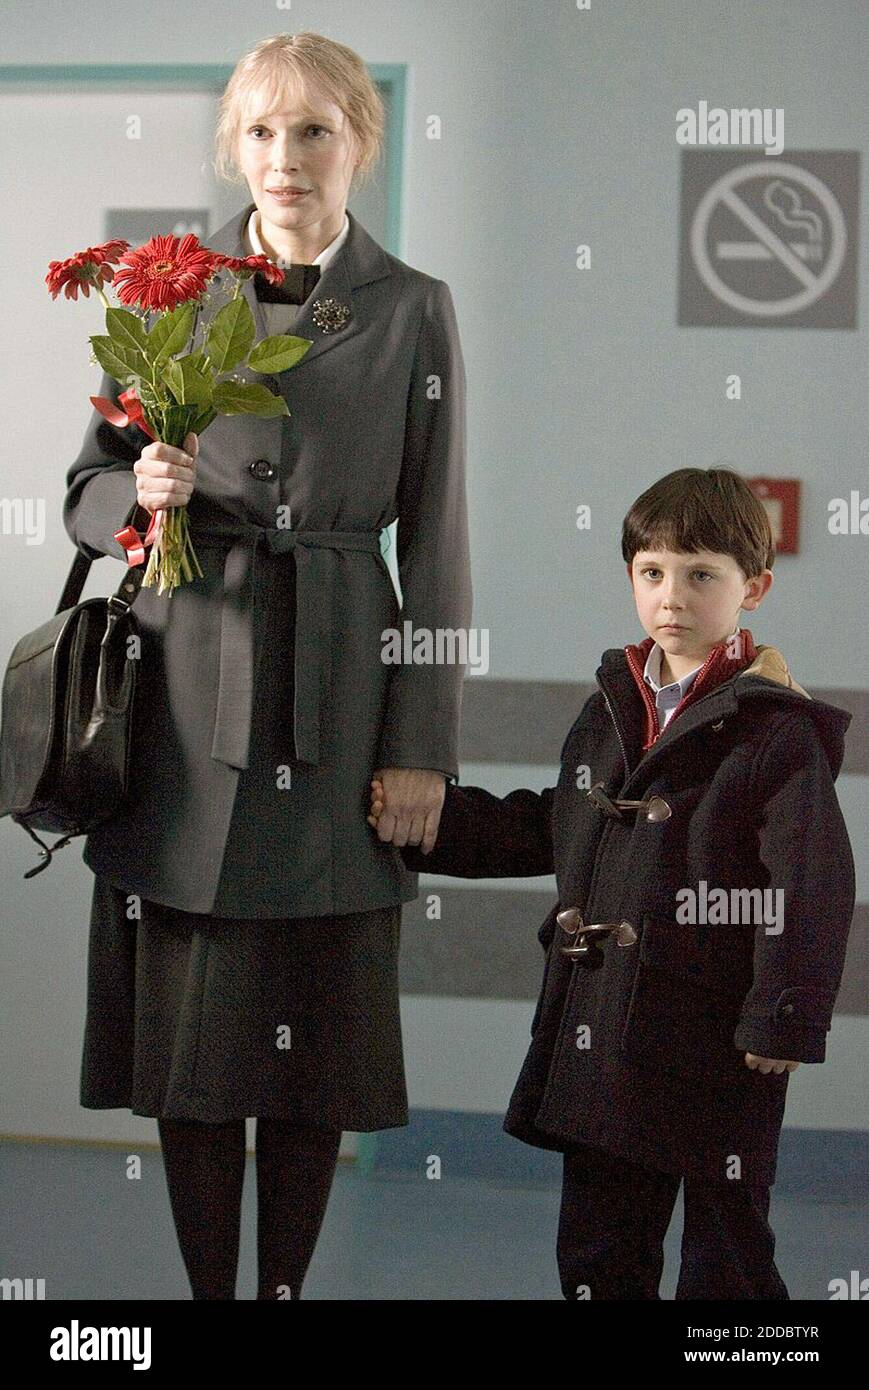 NO FILM, NO VIDEO, NO TV, NO DOCUMENTARY - Mrs. Baylock (Mia Farrow) and Damien (Seamus Davey-Fitzpatrick) arrive at the hospital to visit Damien's mother, who has been seriously injured, in the movie, 'The Omen.' Photo via KRT/ABACAPRESS.COM Stock Photo